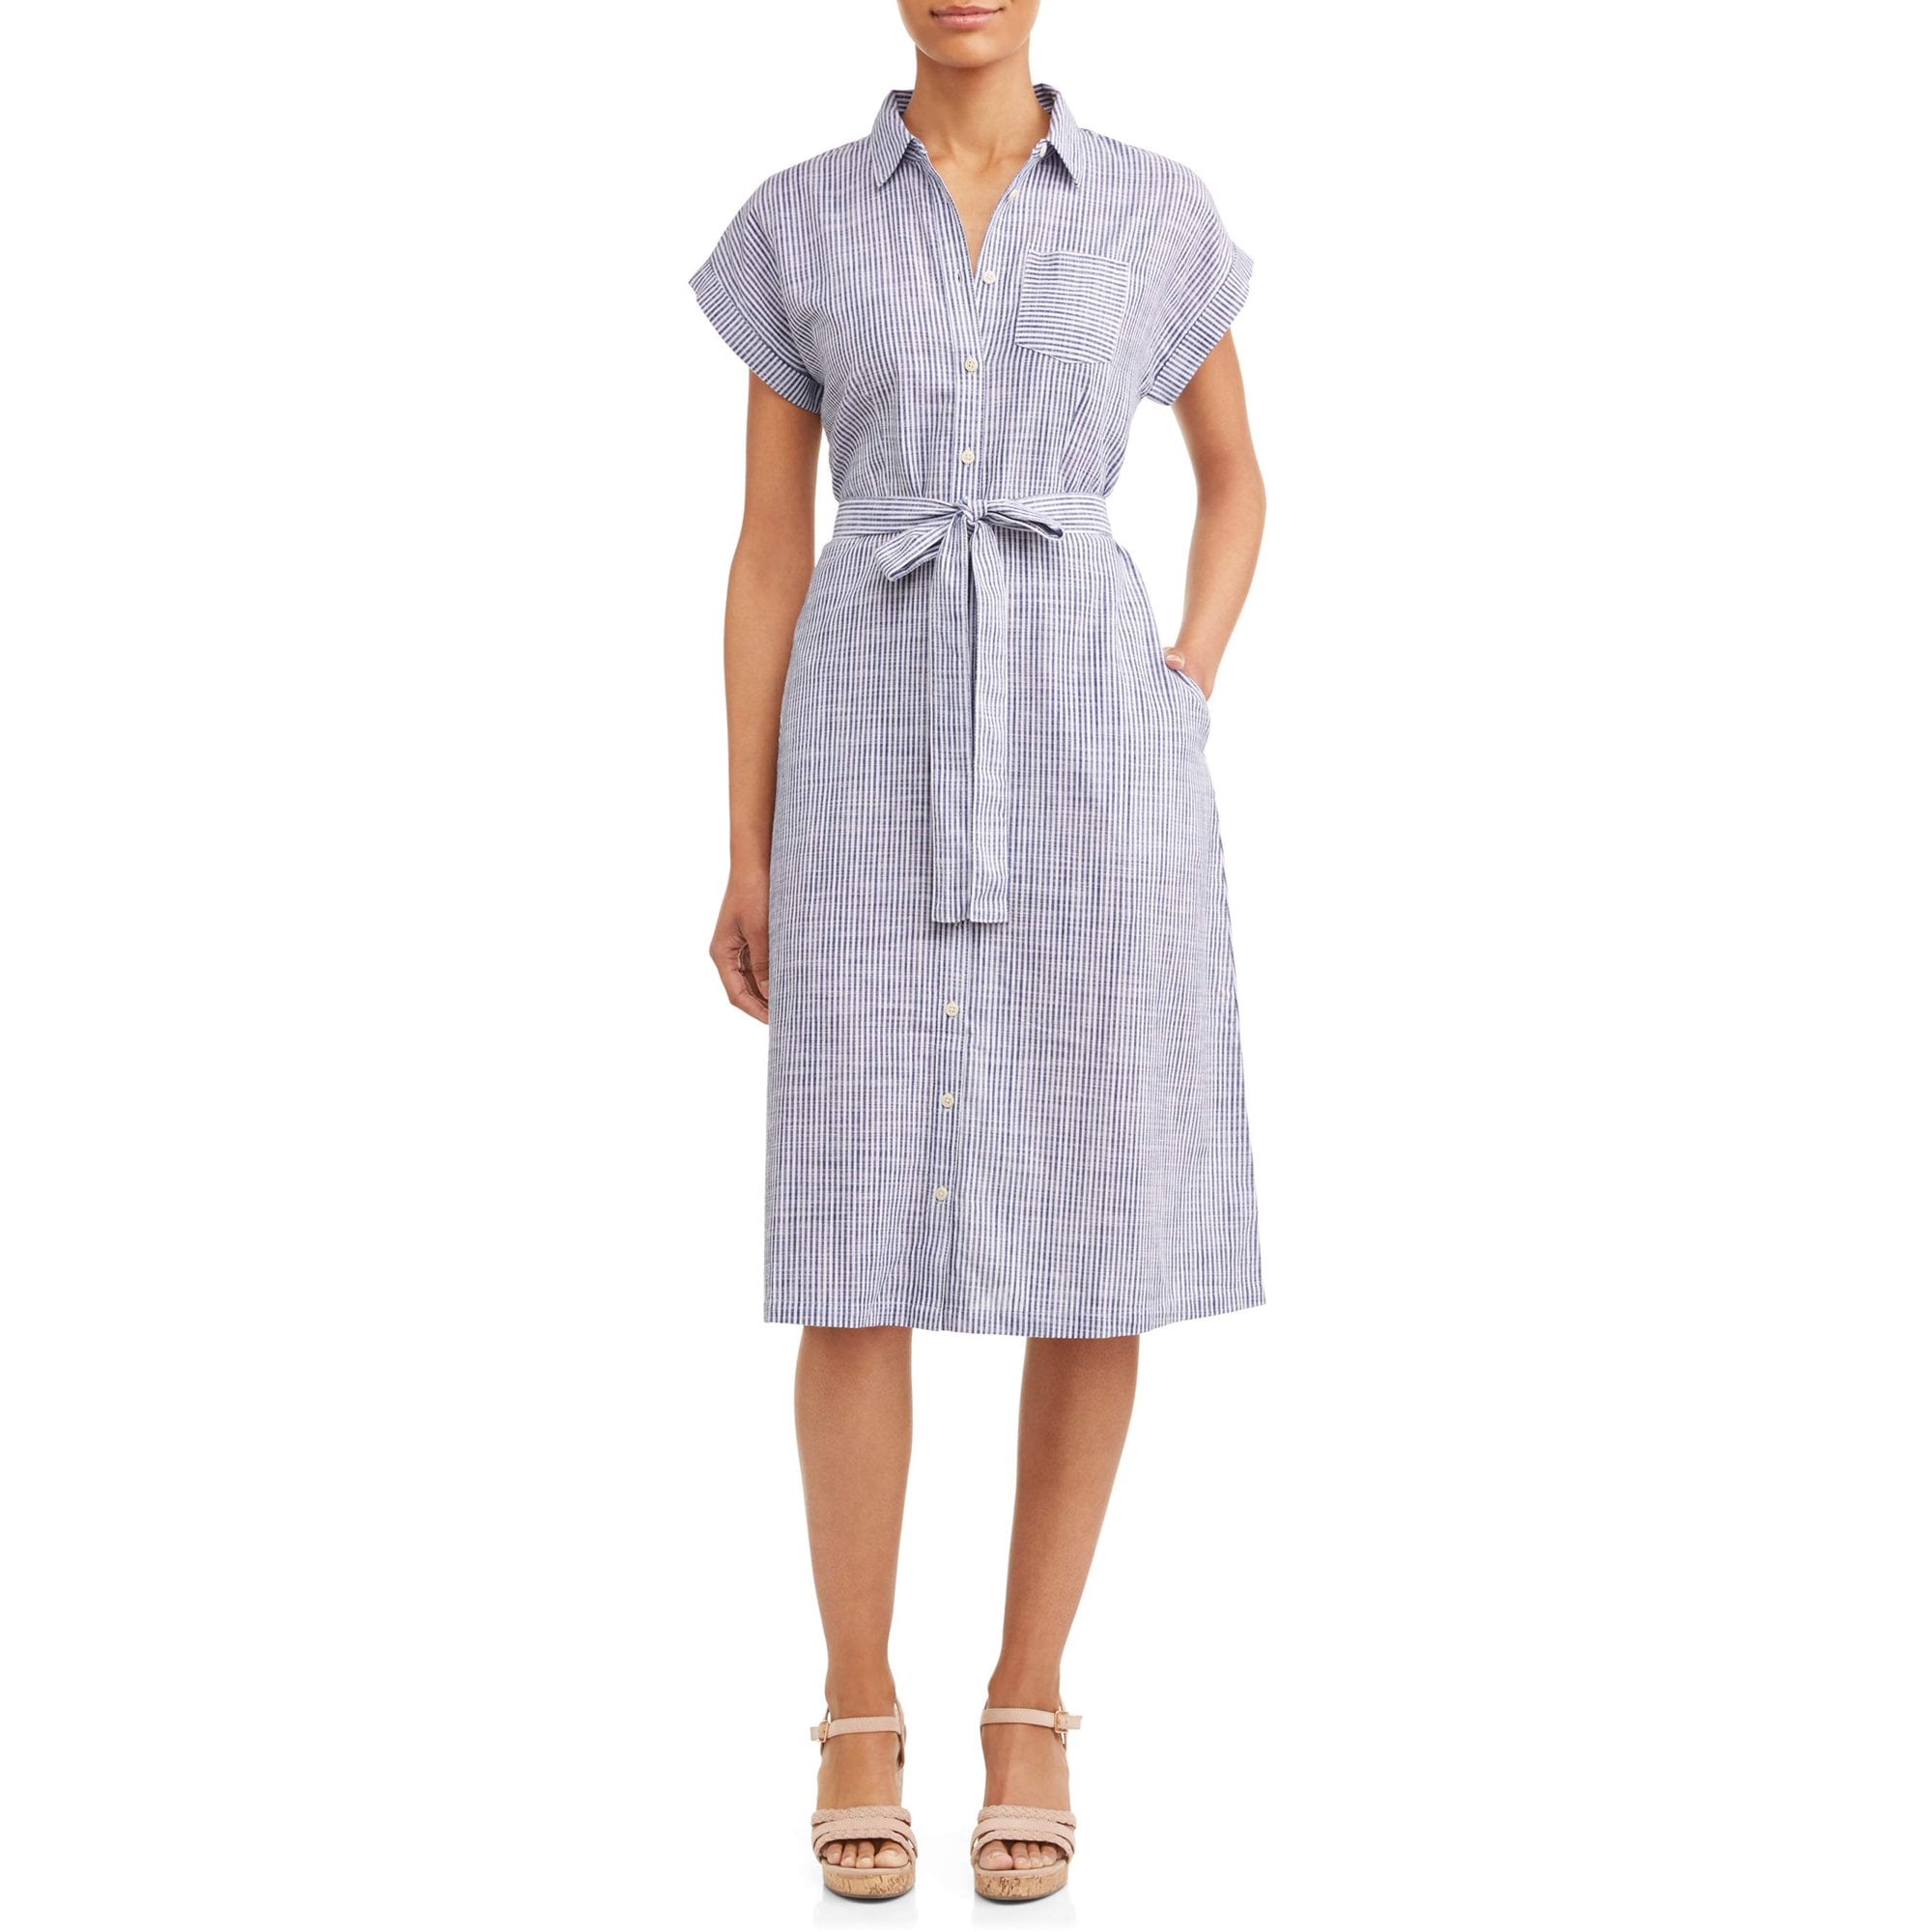 women's belted midi shirt dress with pocket